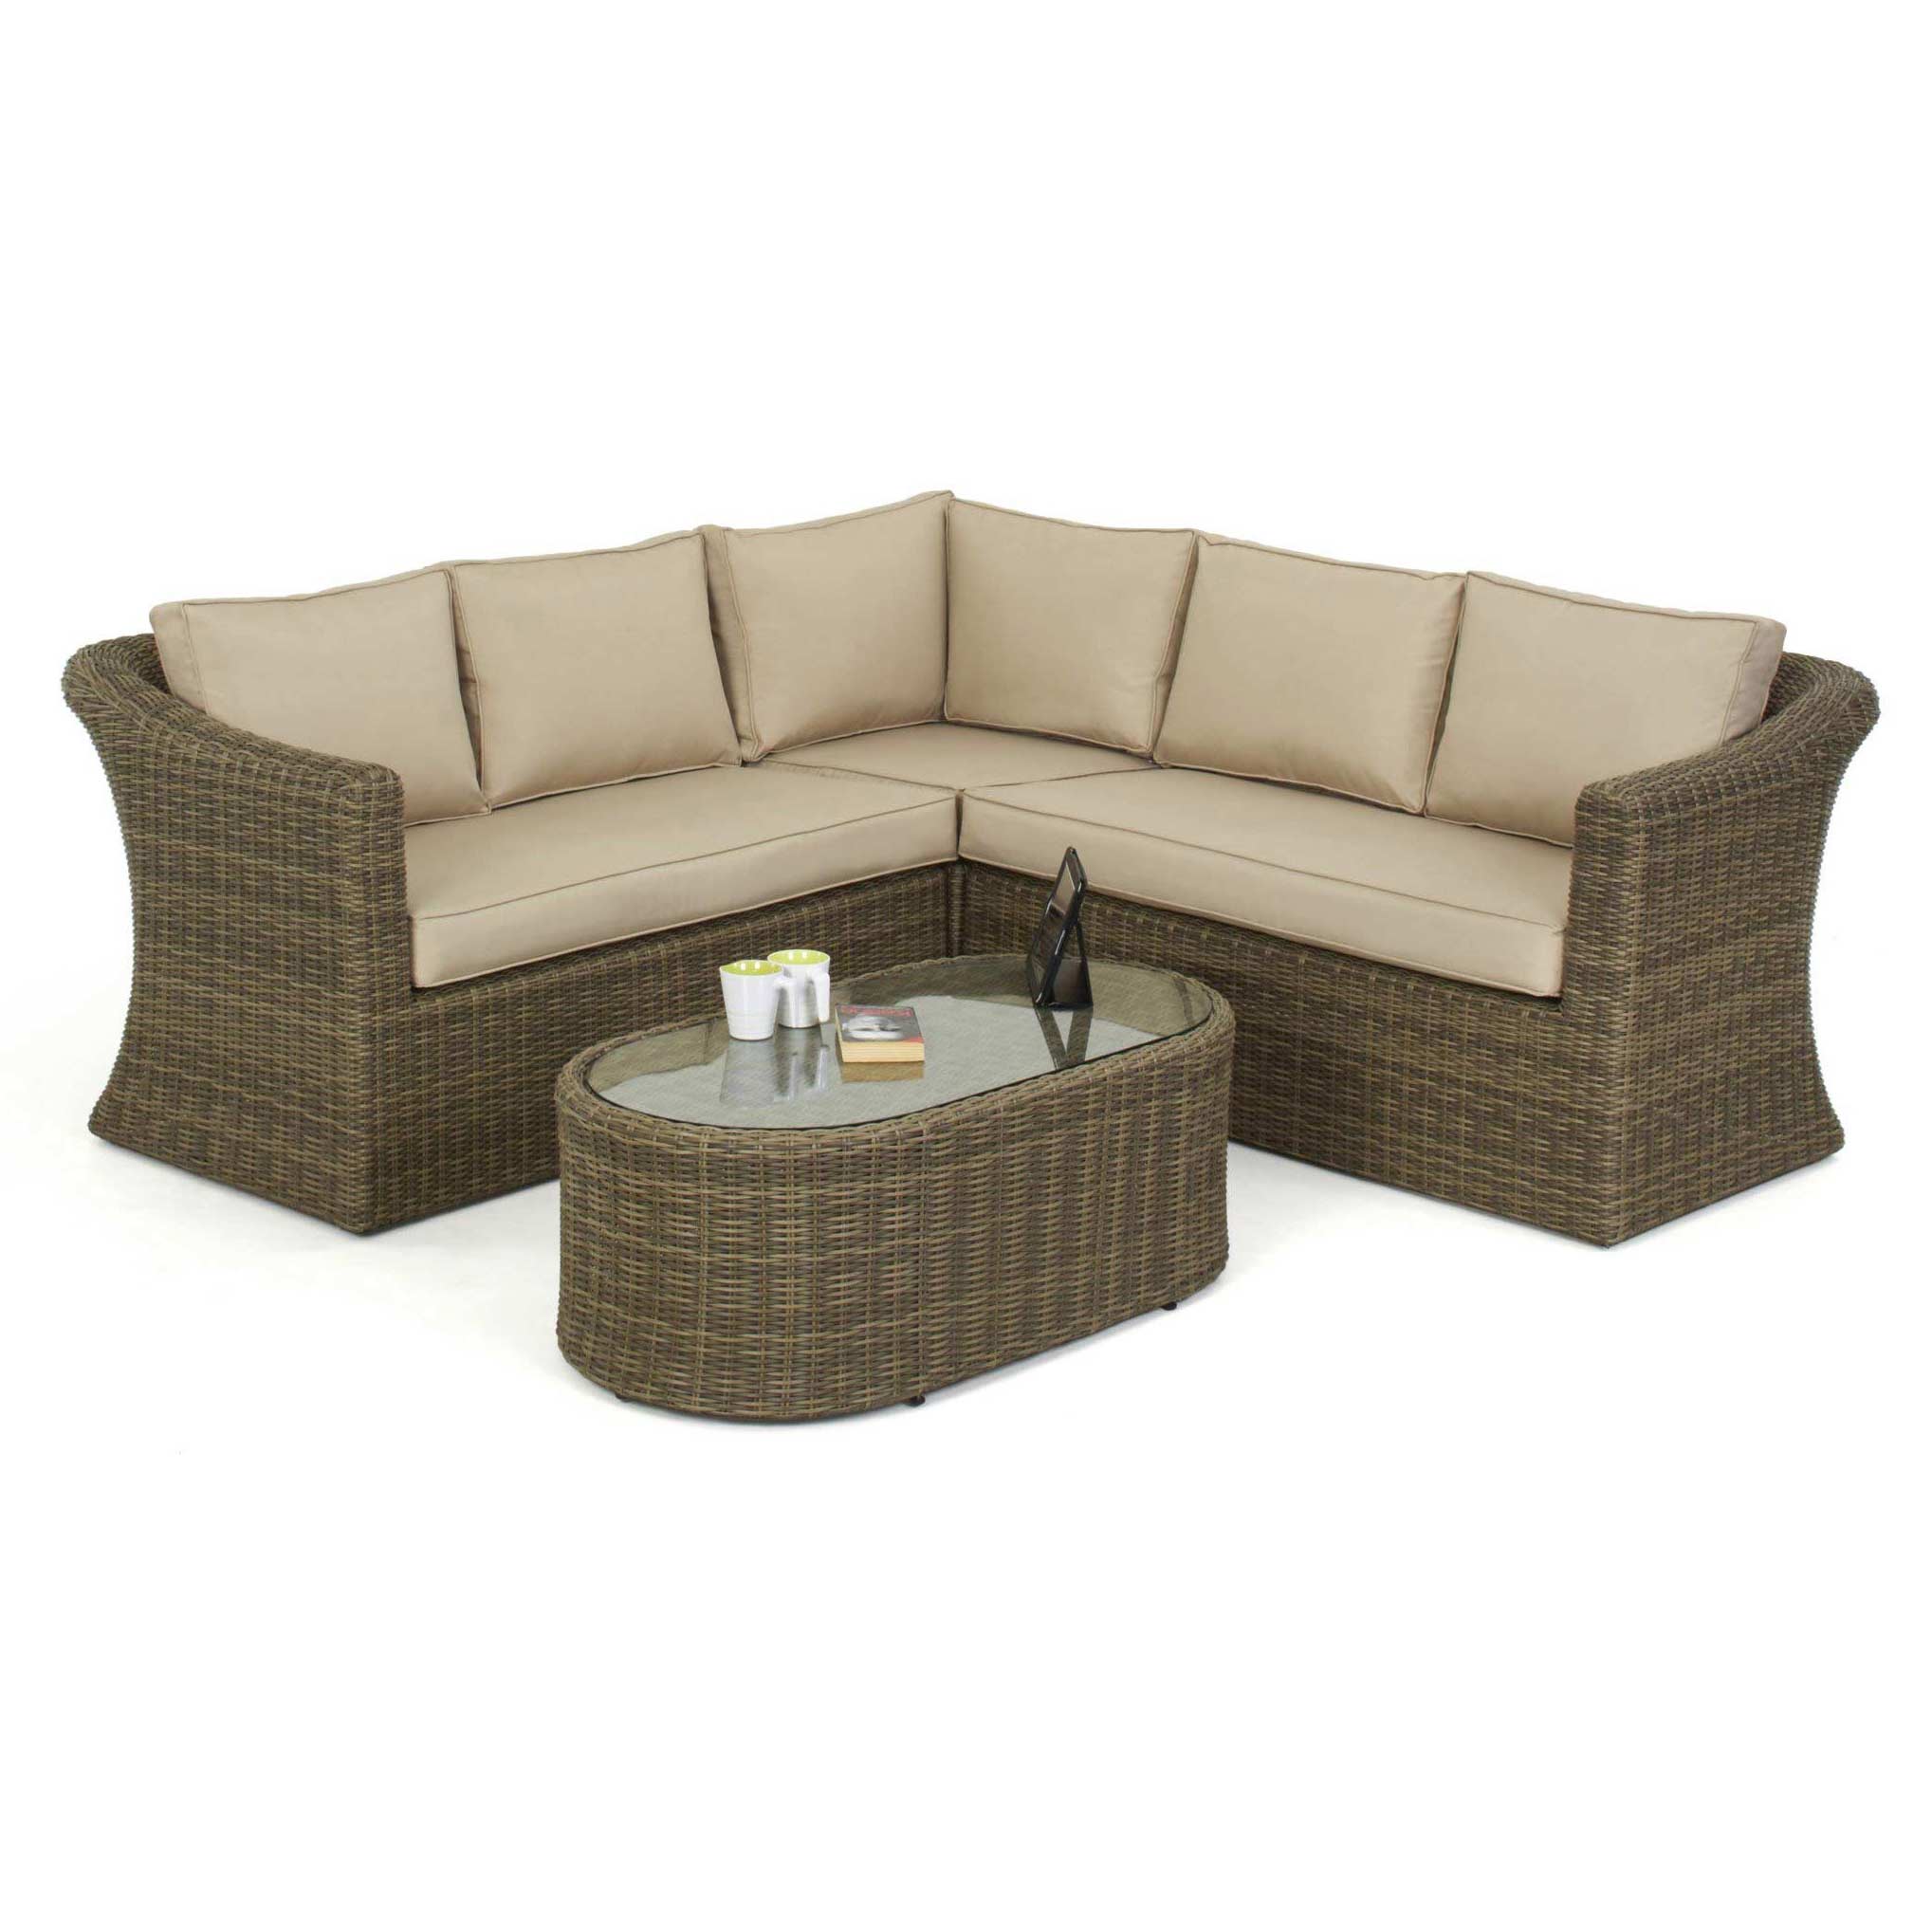 Natural coloured rattan corner sofa and matching oval coffee table.